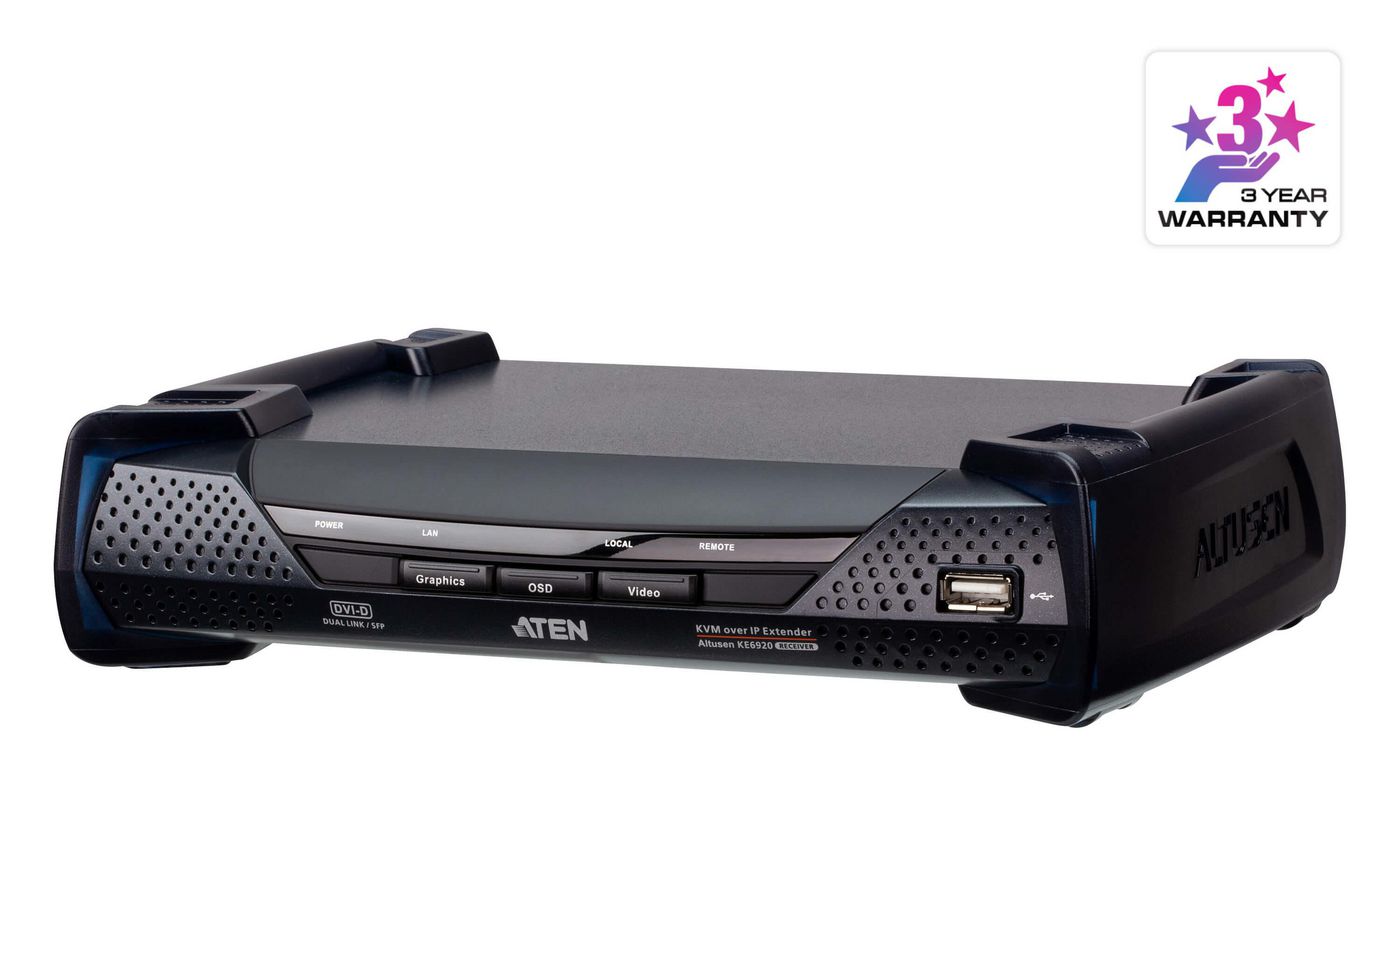 [PREMIUM] Aten USB 2K DVI-D Dual-Link KVM over IPReceiver with USB Peripheral Support  Power/LAN Red